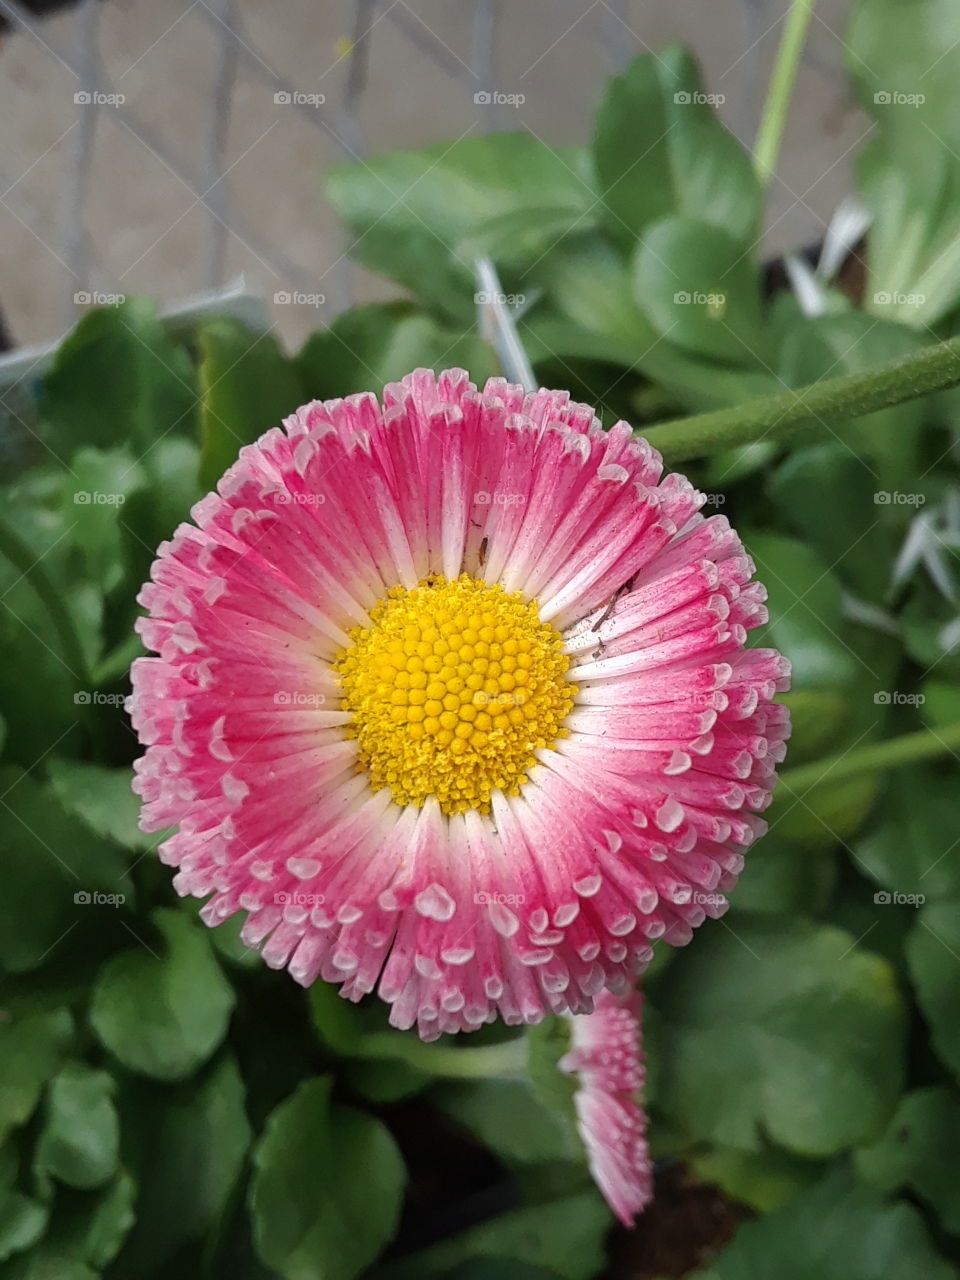 pink daisy like flower with yellow center